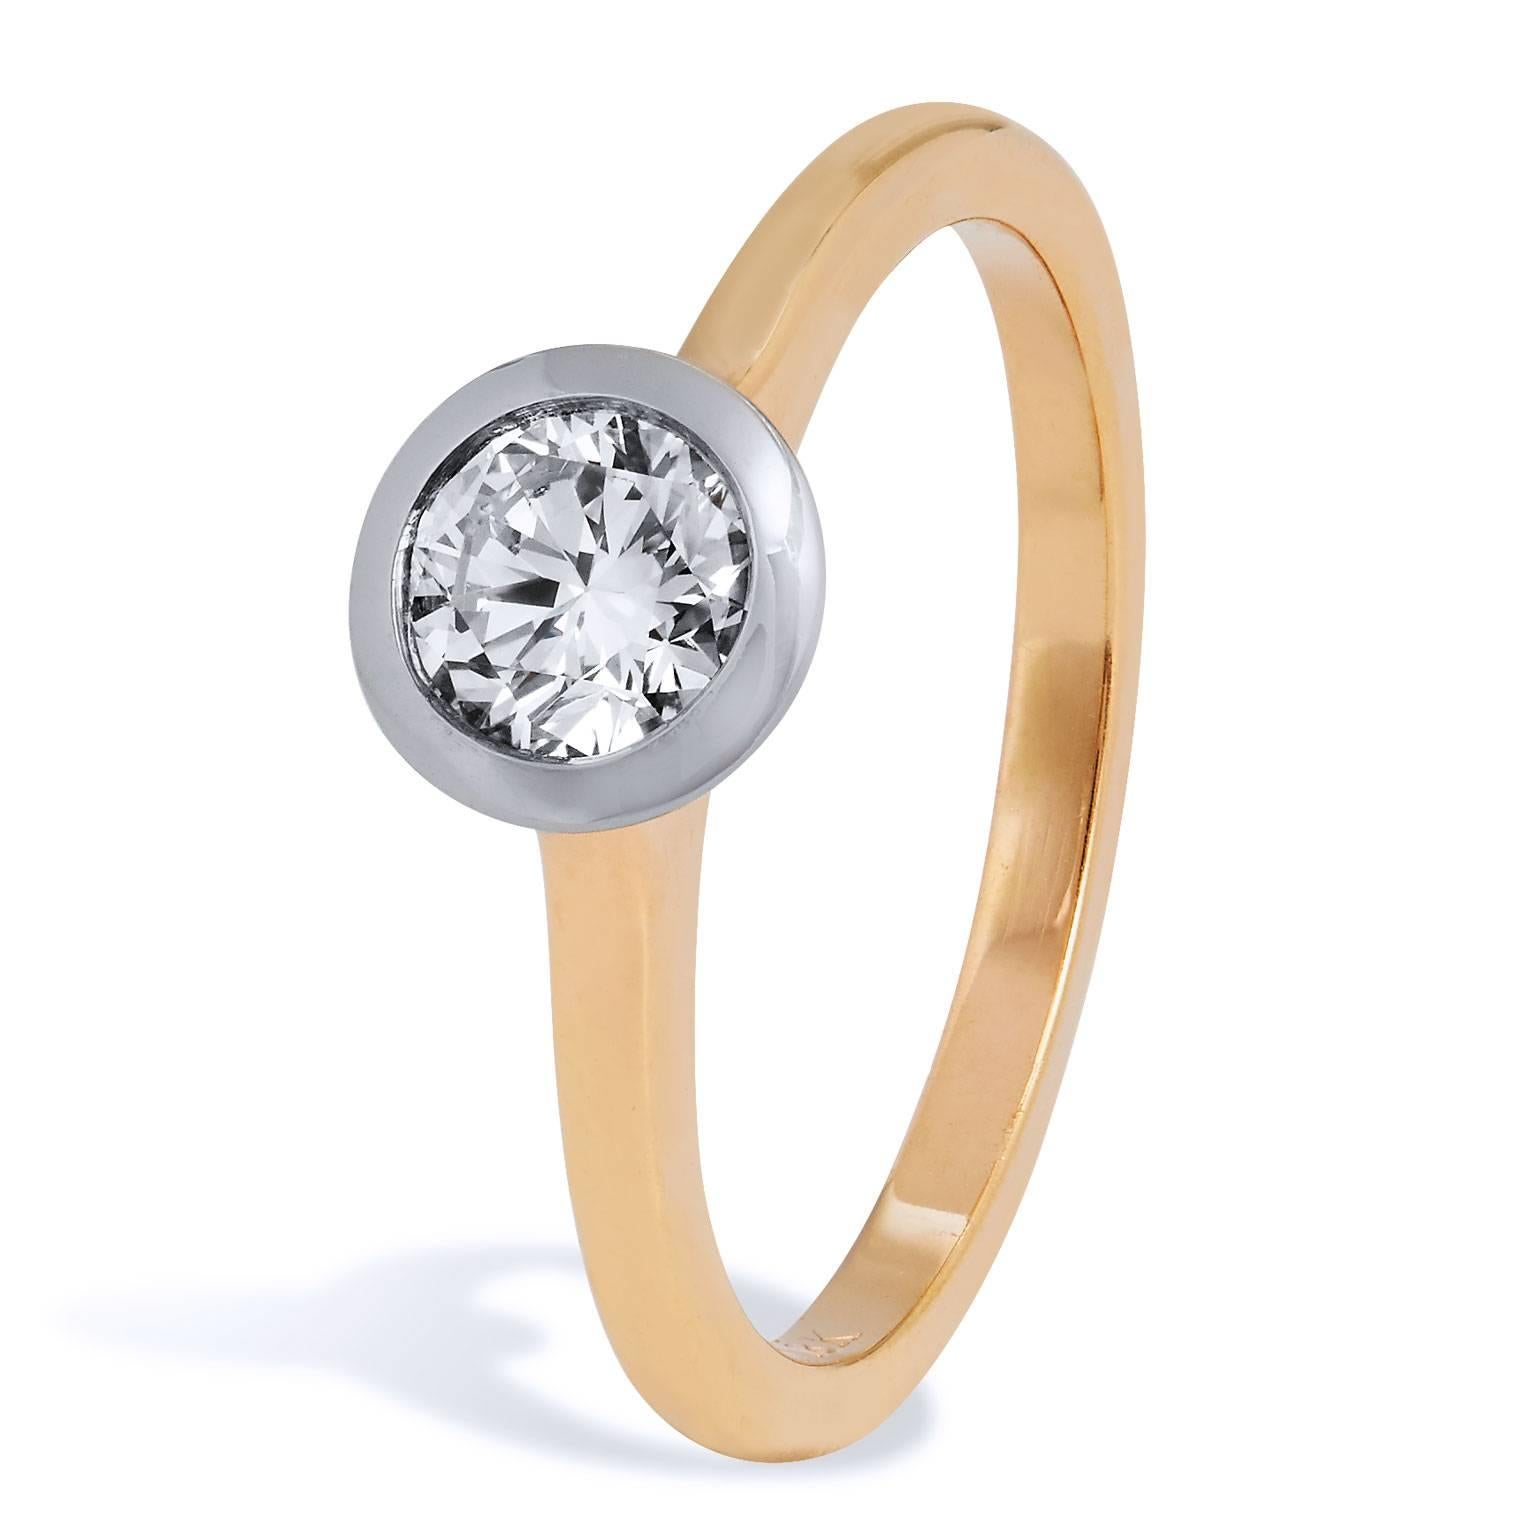 Enjoy the refined charm and grace of this 18 karat rose gold and white gold ring. A dazzling 0.59 carat round brilliant cut diamond (H/SI1; GIA #6157588930) in white gold bezel is set at center as a solitaire. While the warmth of the rose gold band